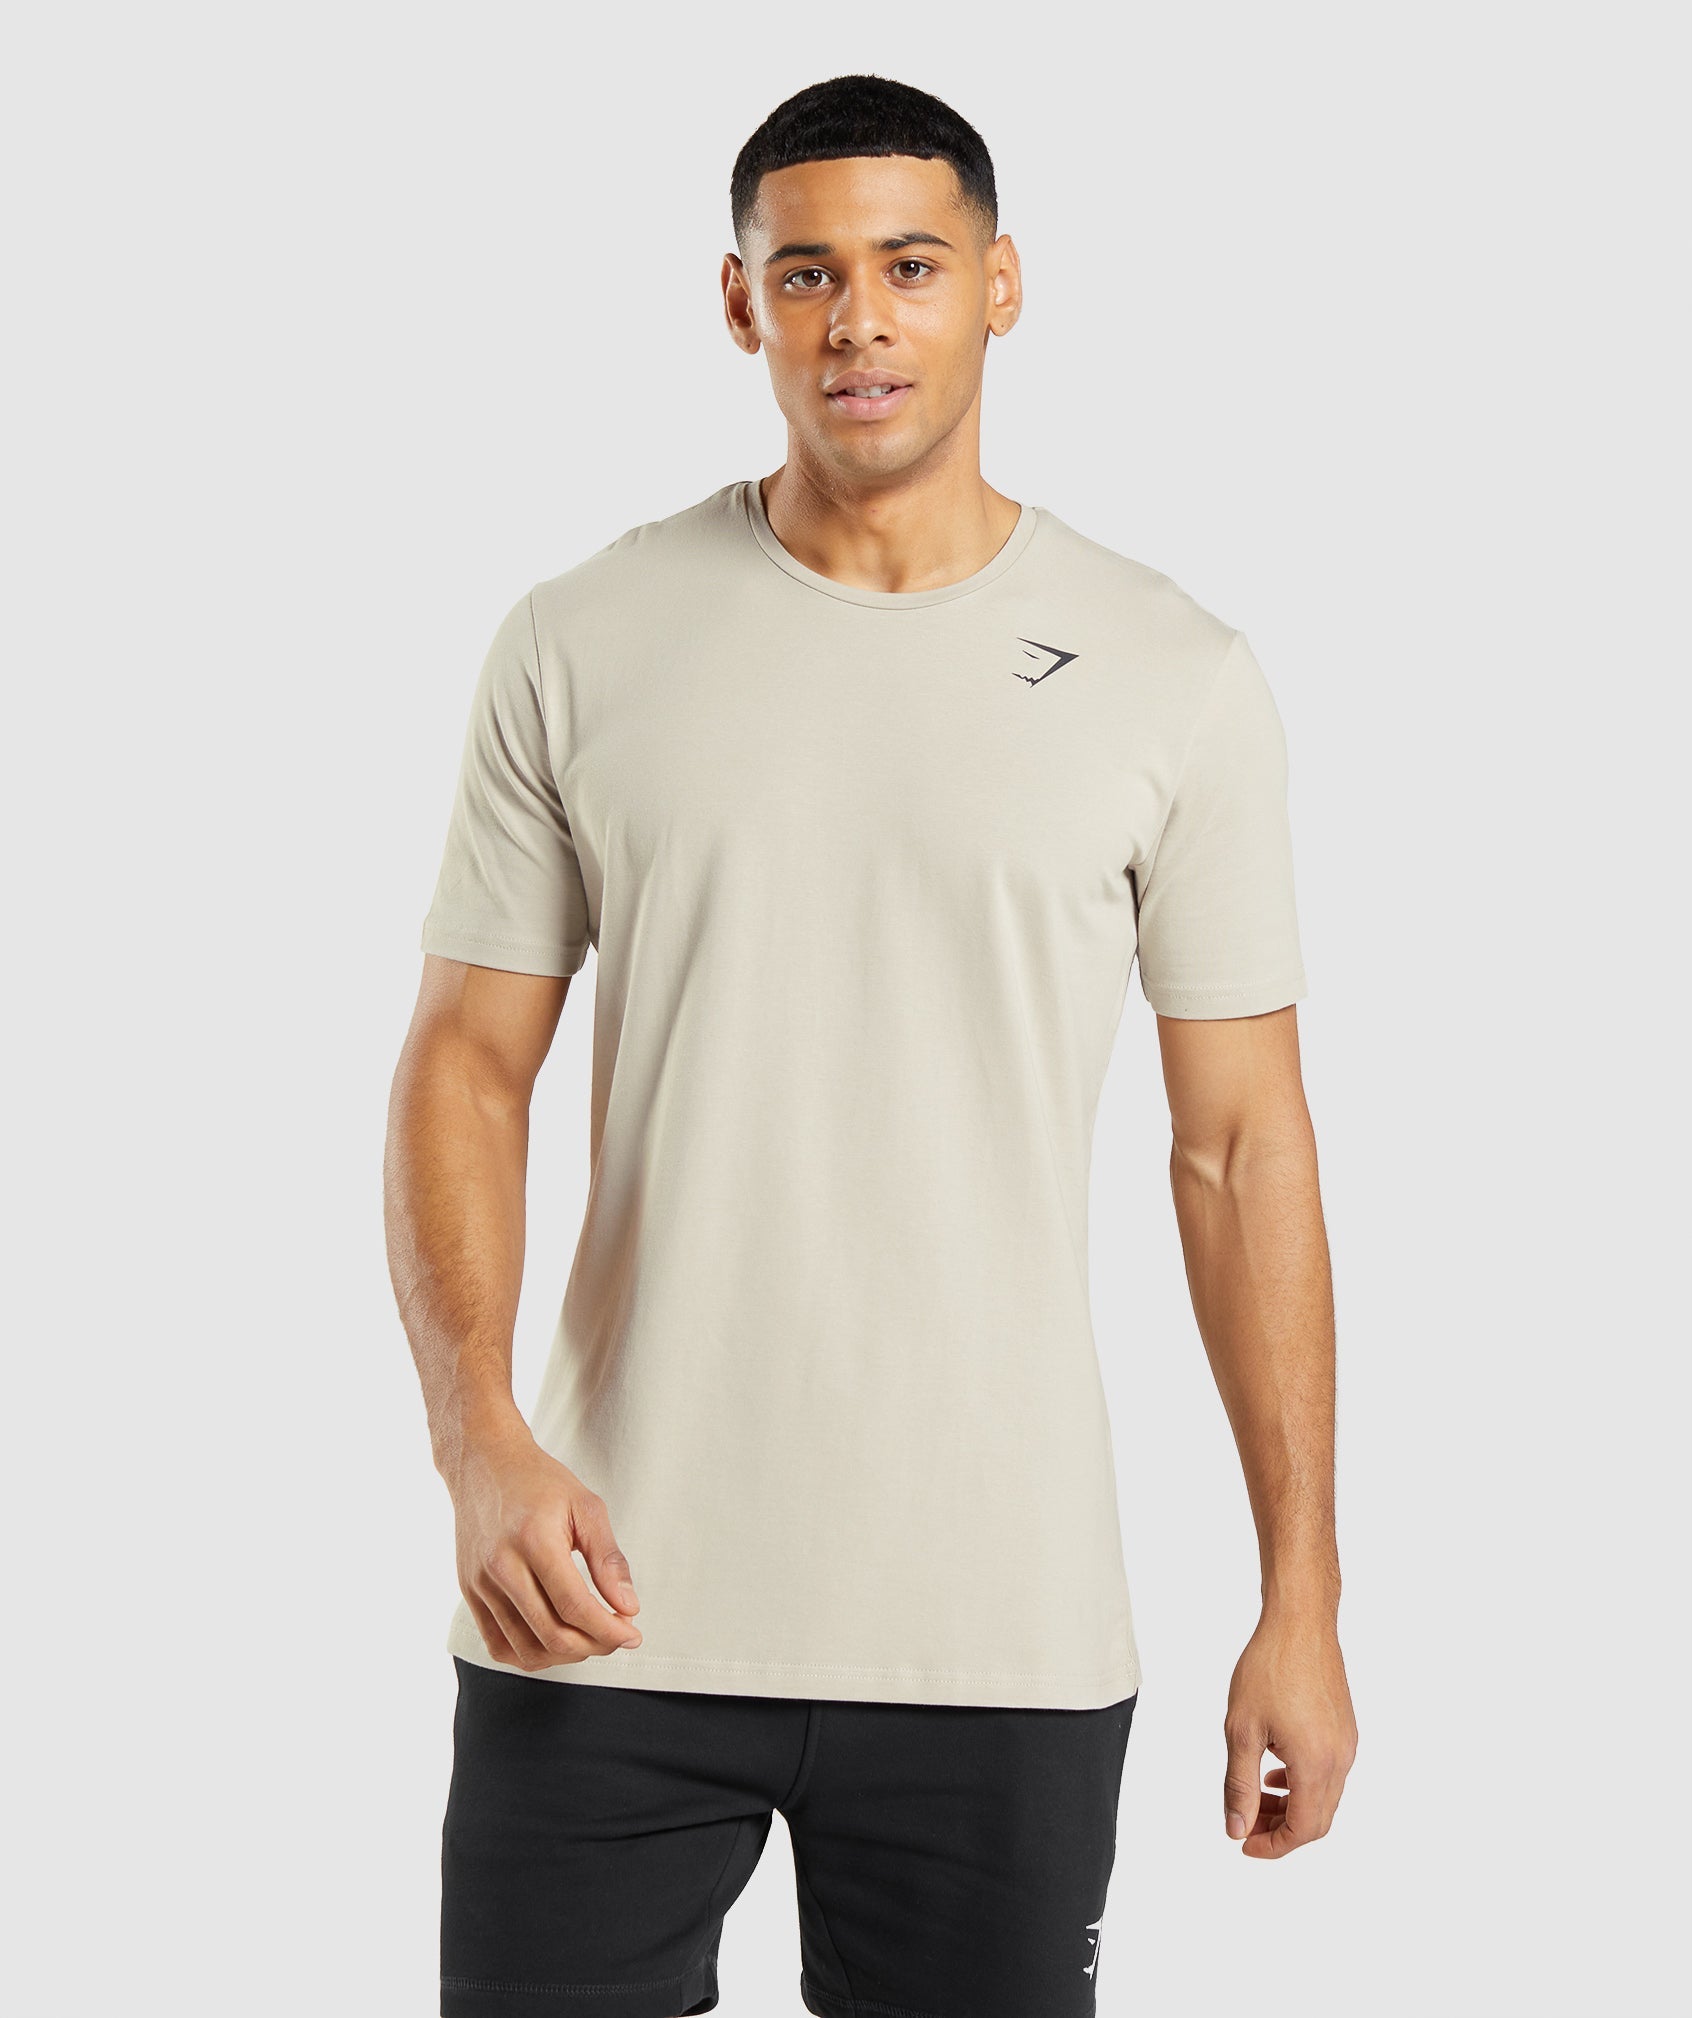 Essential T-Shirt in Pebble Grey - view 1